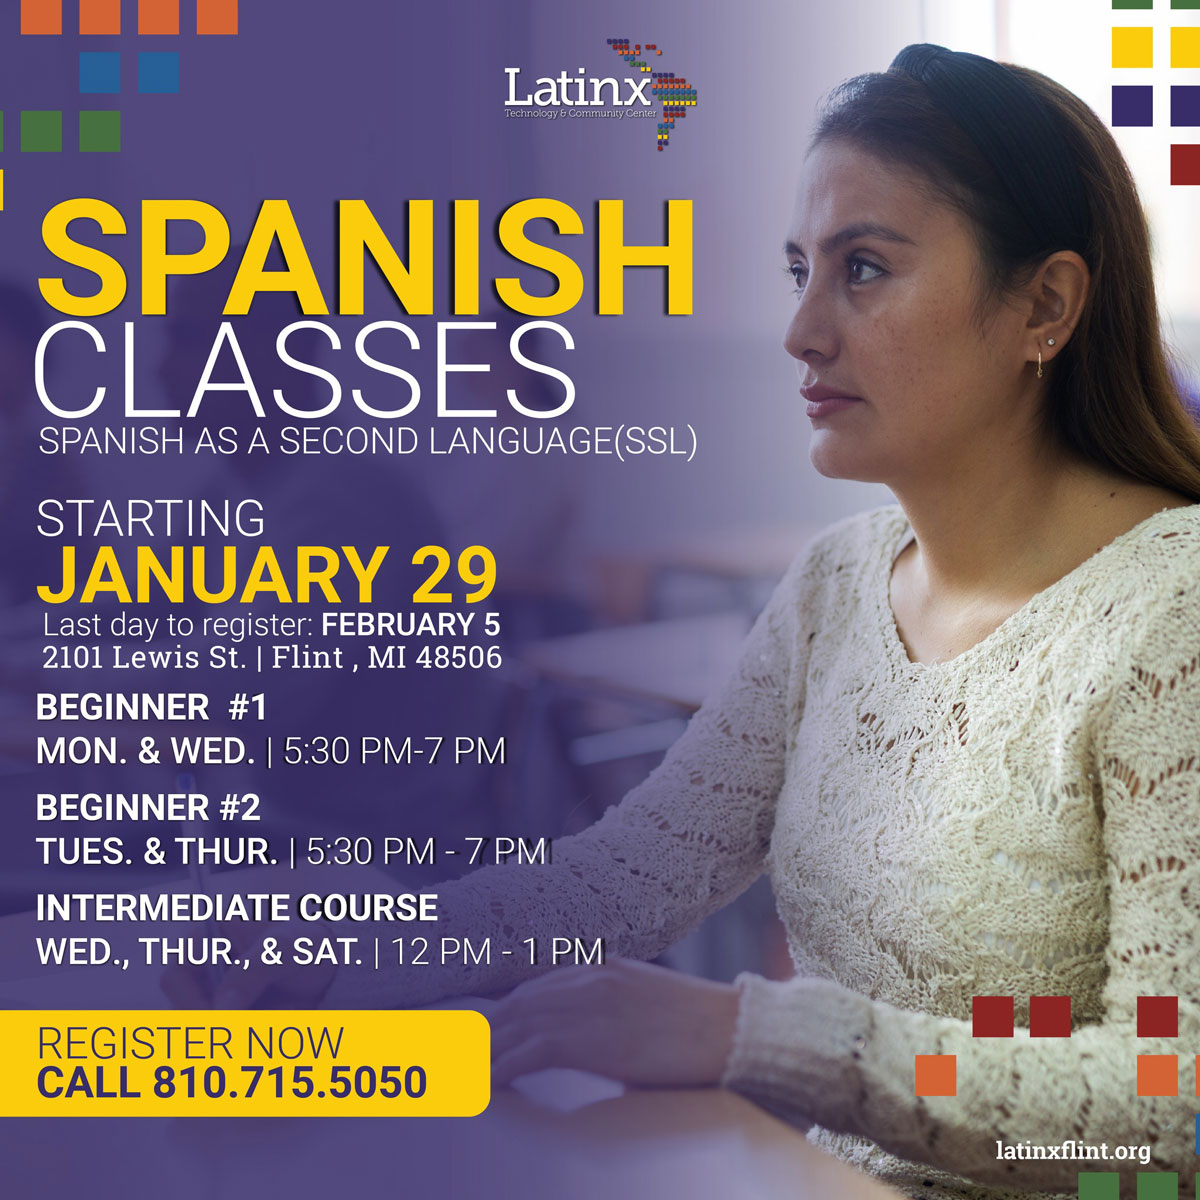 Unlocking Opportunities: Register Now for ESL and SSL Classes at Latinx Technology and Community Center